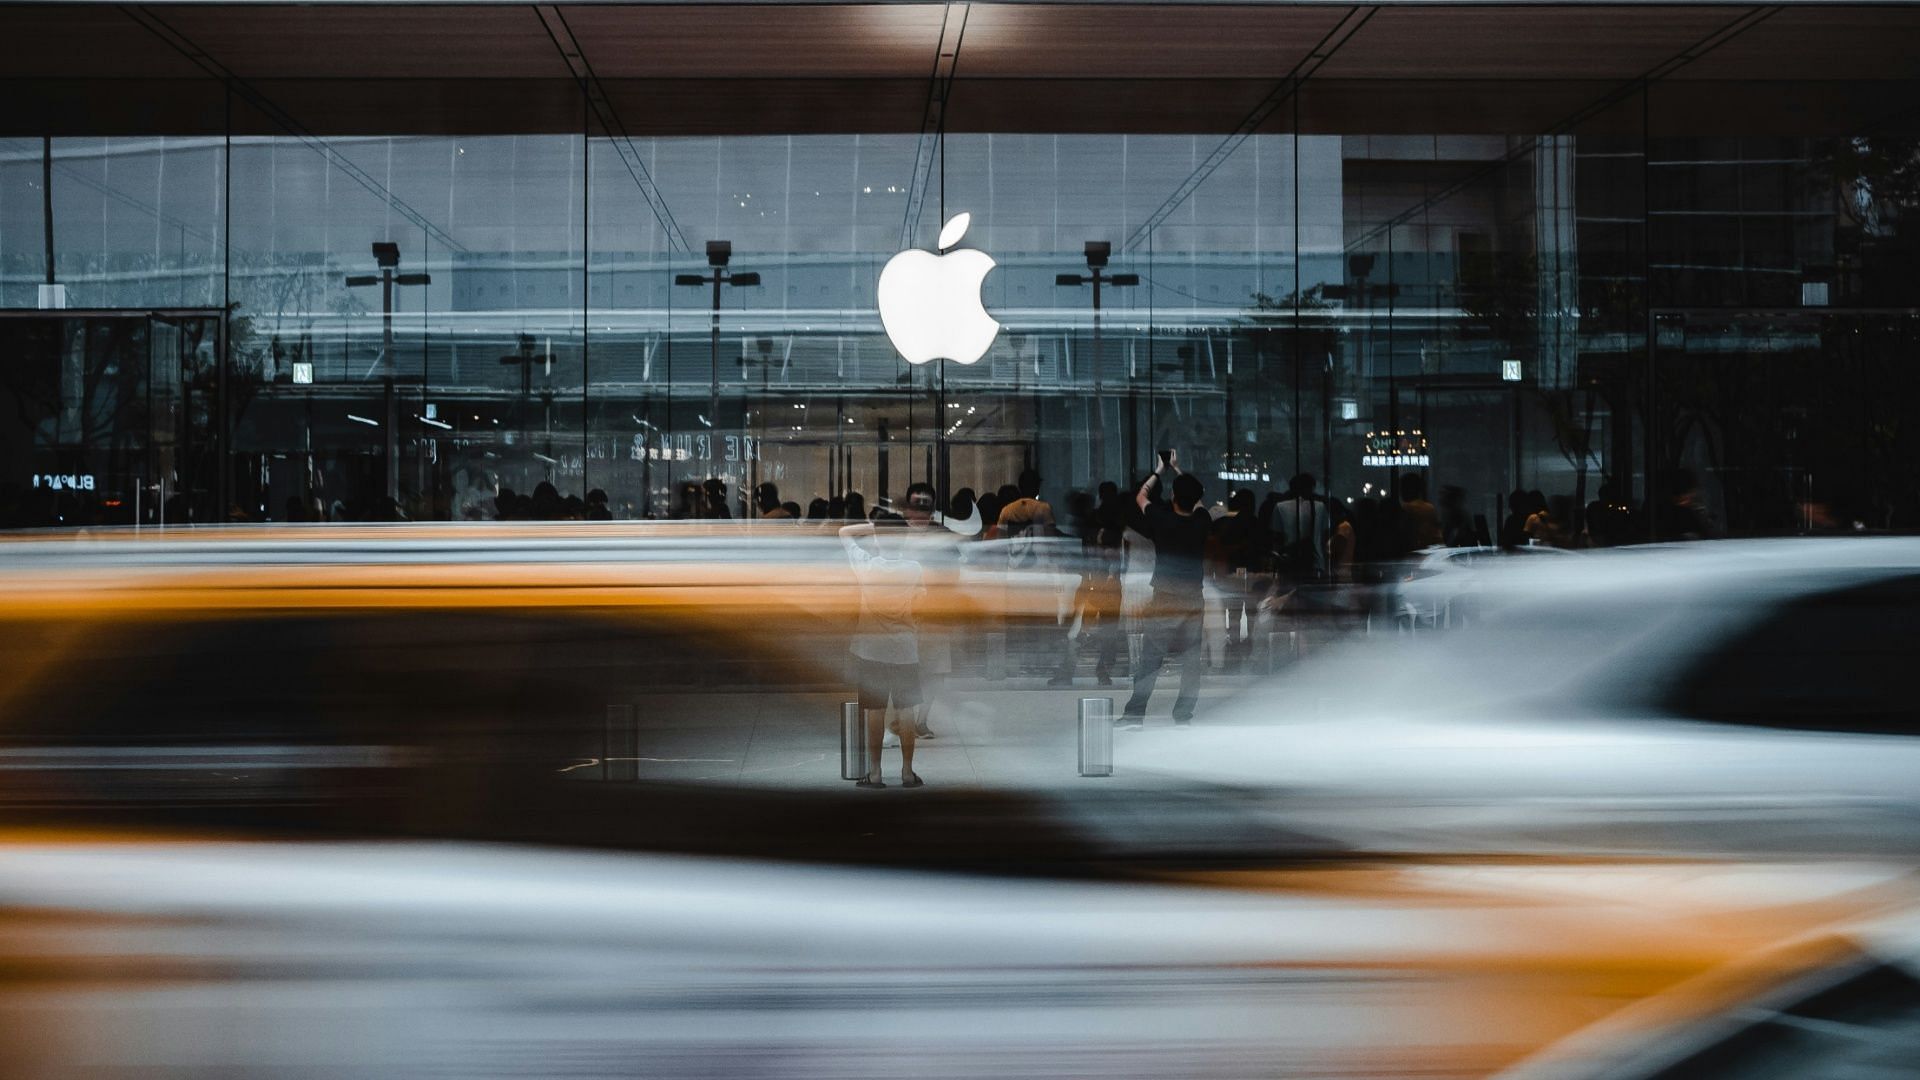 Apple pulled the plug on its electric car project (Photo by Andy Wang on Unsplash)